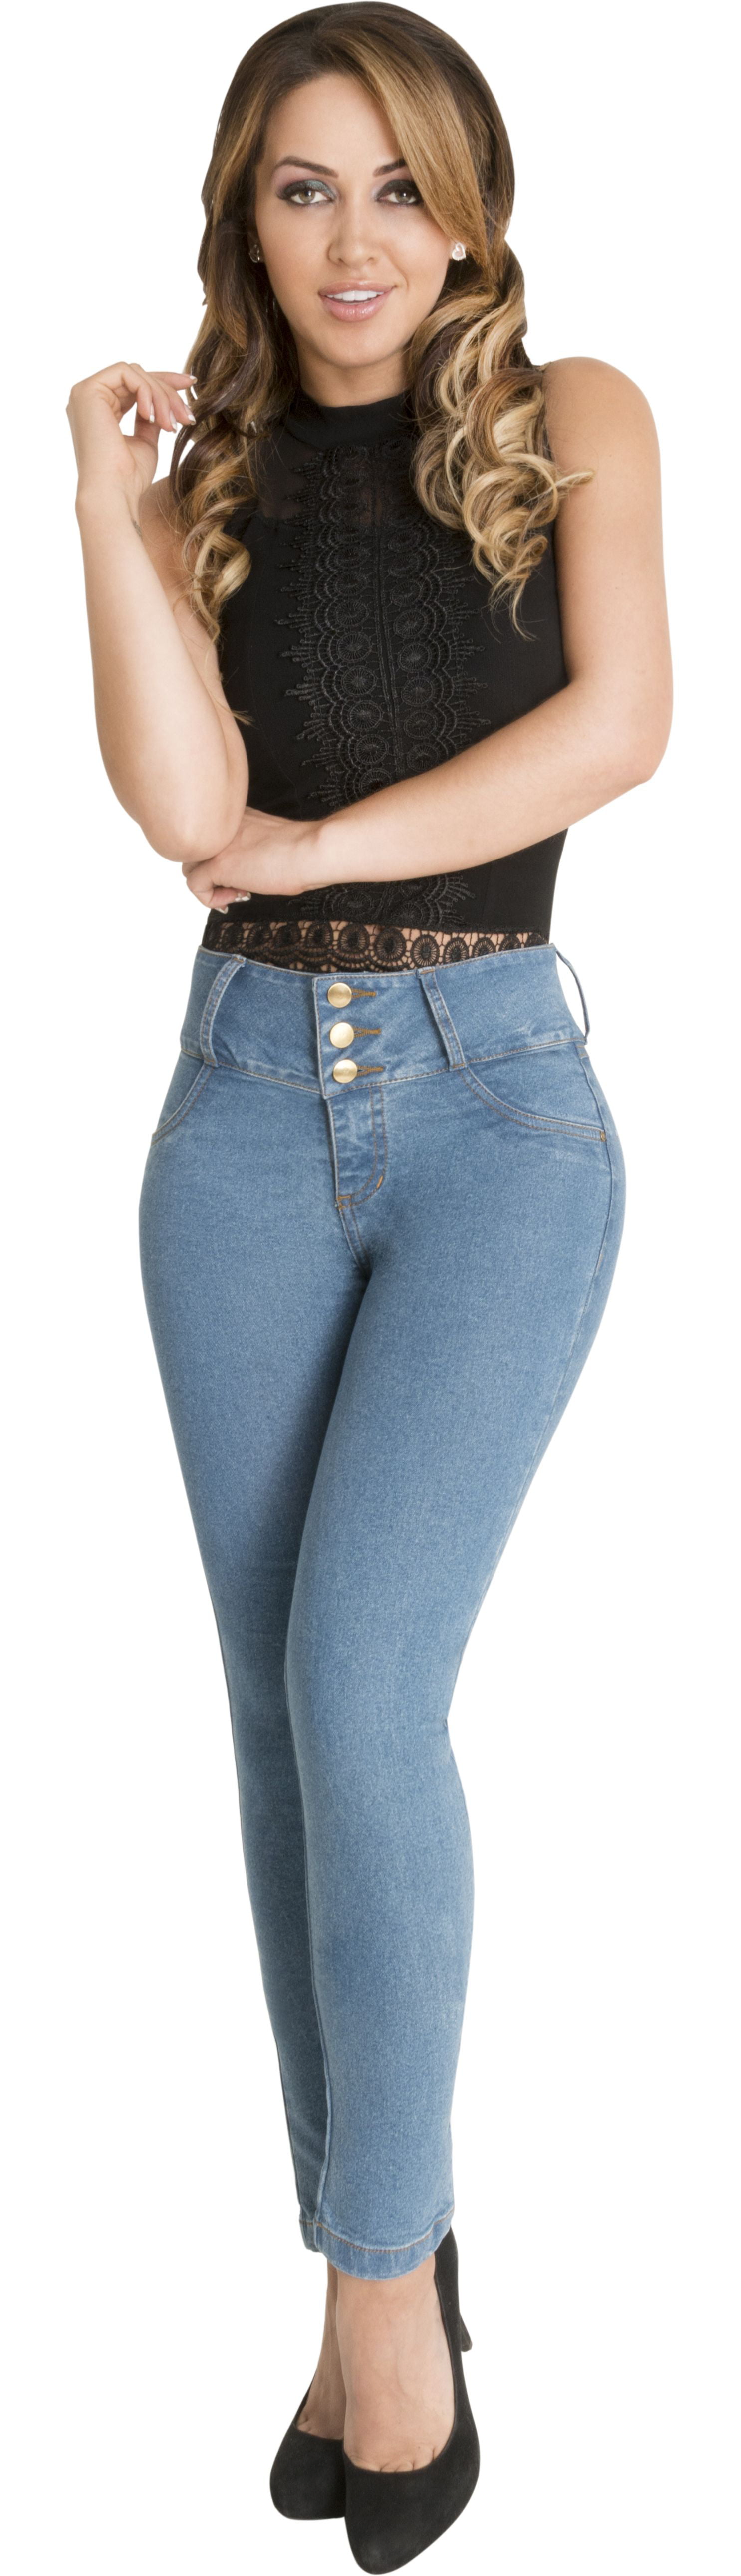 Jeans Levanta cola jeans colombianos Go up butt lifter levanta pompis 2226